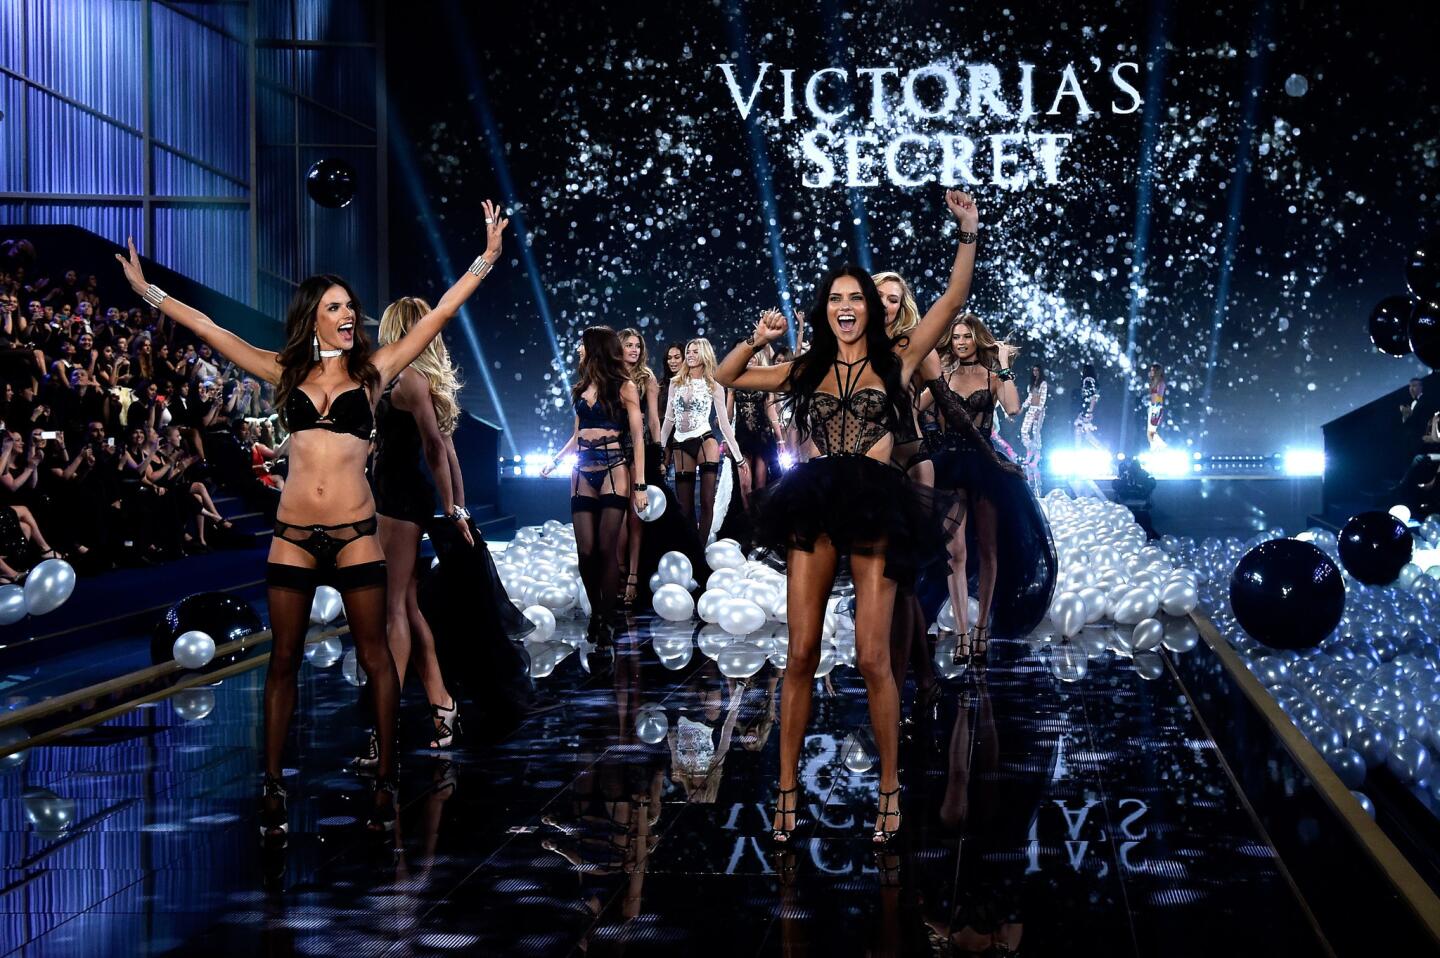 The models storm the runway at Earls Court in London at the 2014 Victoria's Secret Fashion Show.